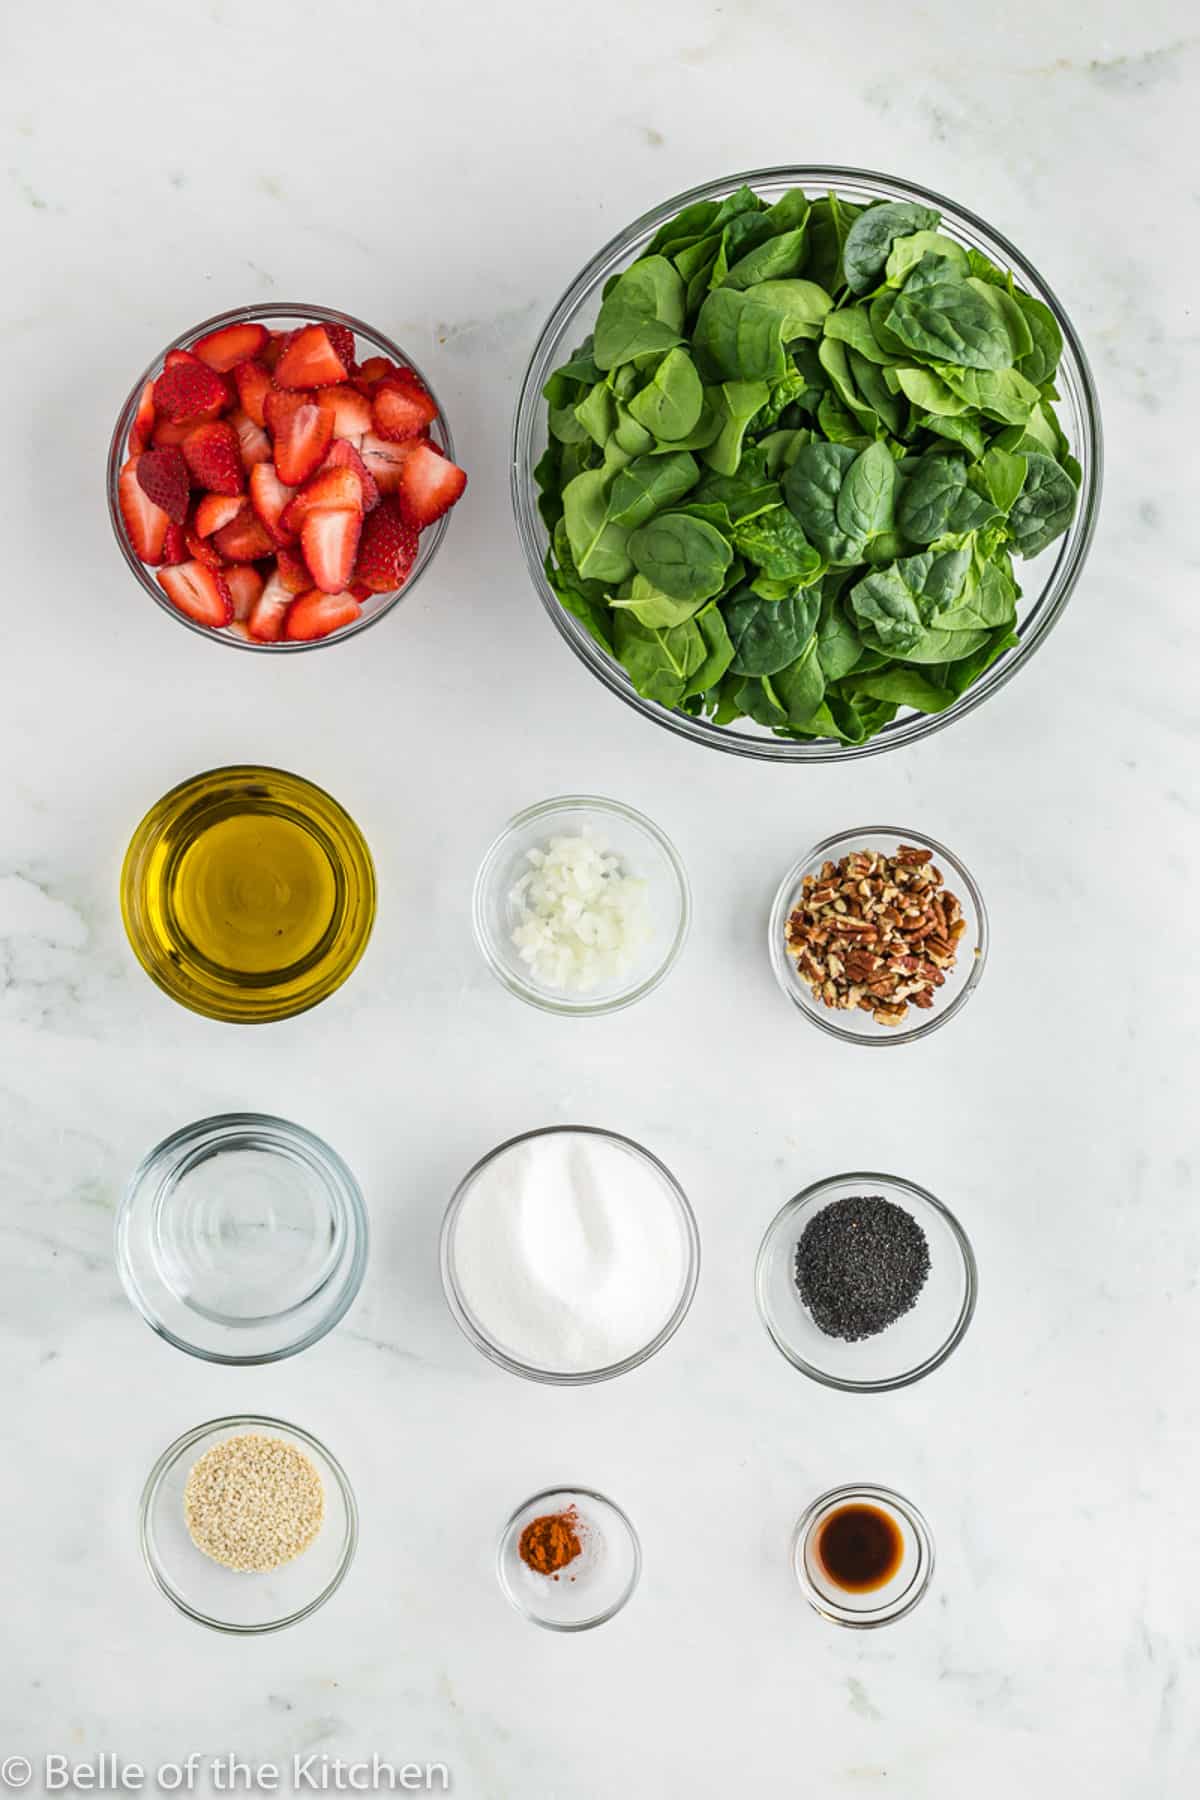 ingredients in bowls on a counter top